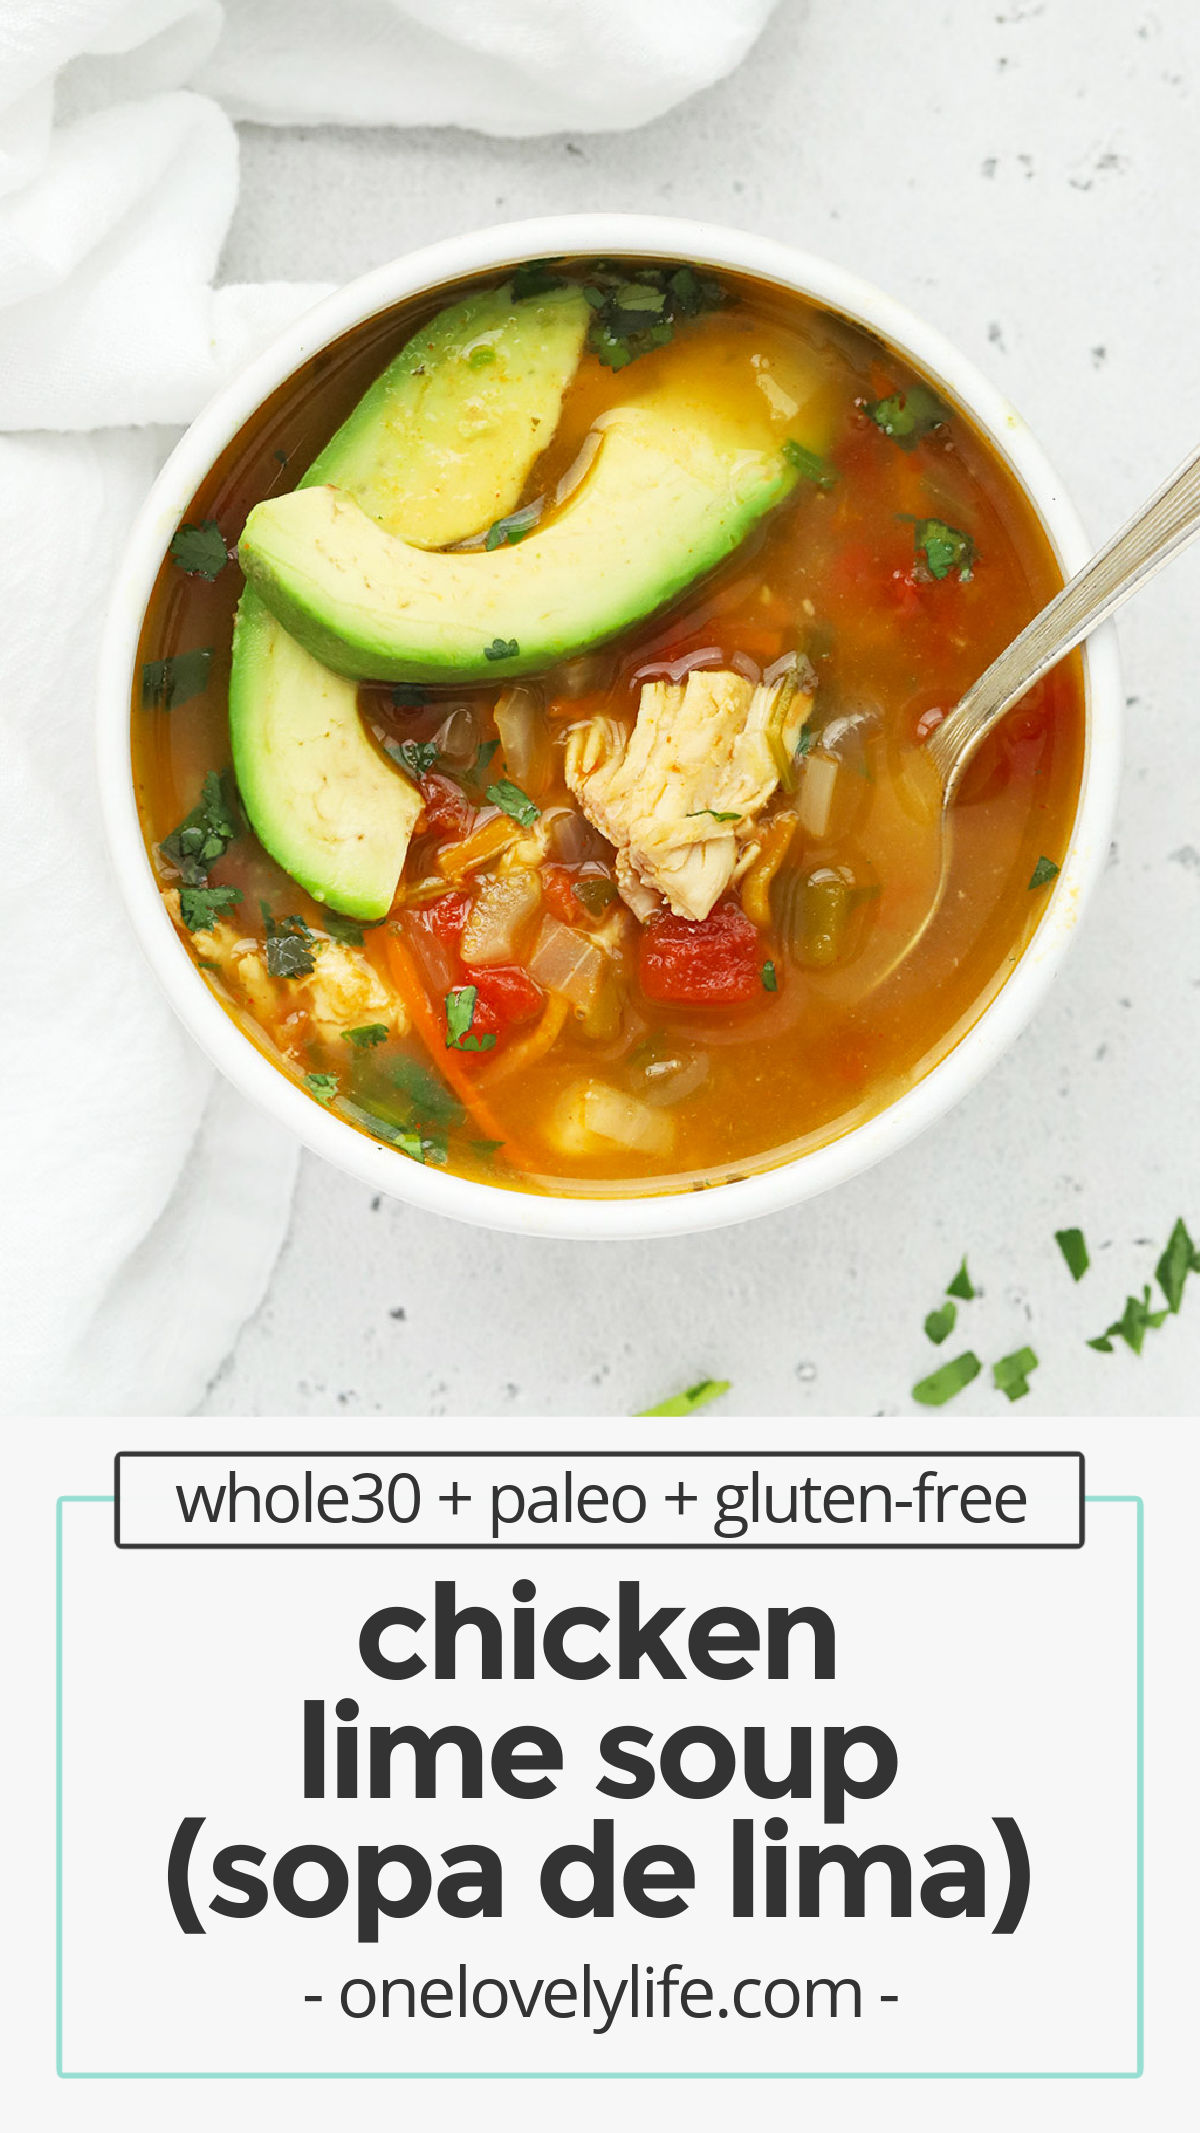 Chicken Lime Soup (Sopa De Lima) - Flavorful, filling & a little bit spicy, this yummy Mexican chicken soup is always a hit! (Paleo, Whole30) // Sopa De Lime recipe // Mexican Soup // Chicken Lime Taco Soup // Chicken Lime Tortilla Soup // Healthy Soup // Paleo Soup // Whole30 Soup // Healthy Dinner // Healthy Lunch